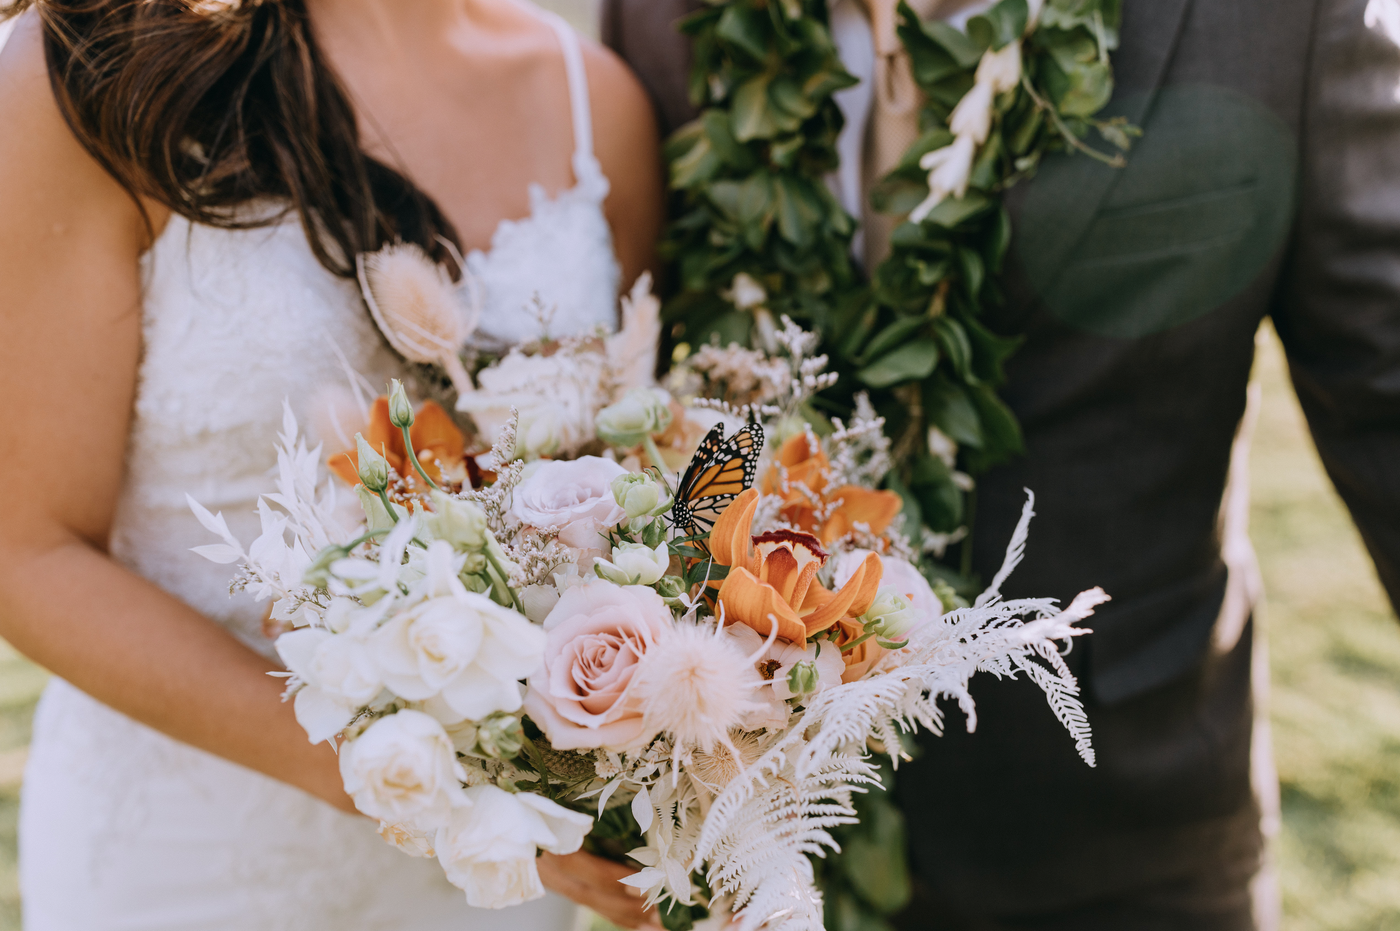 wedding couple released their live monarch butterfly and landed on the bride's bouquet 